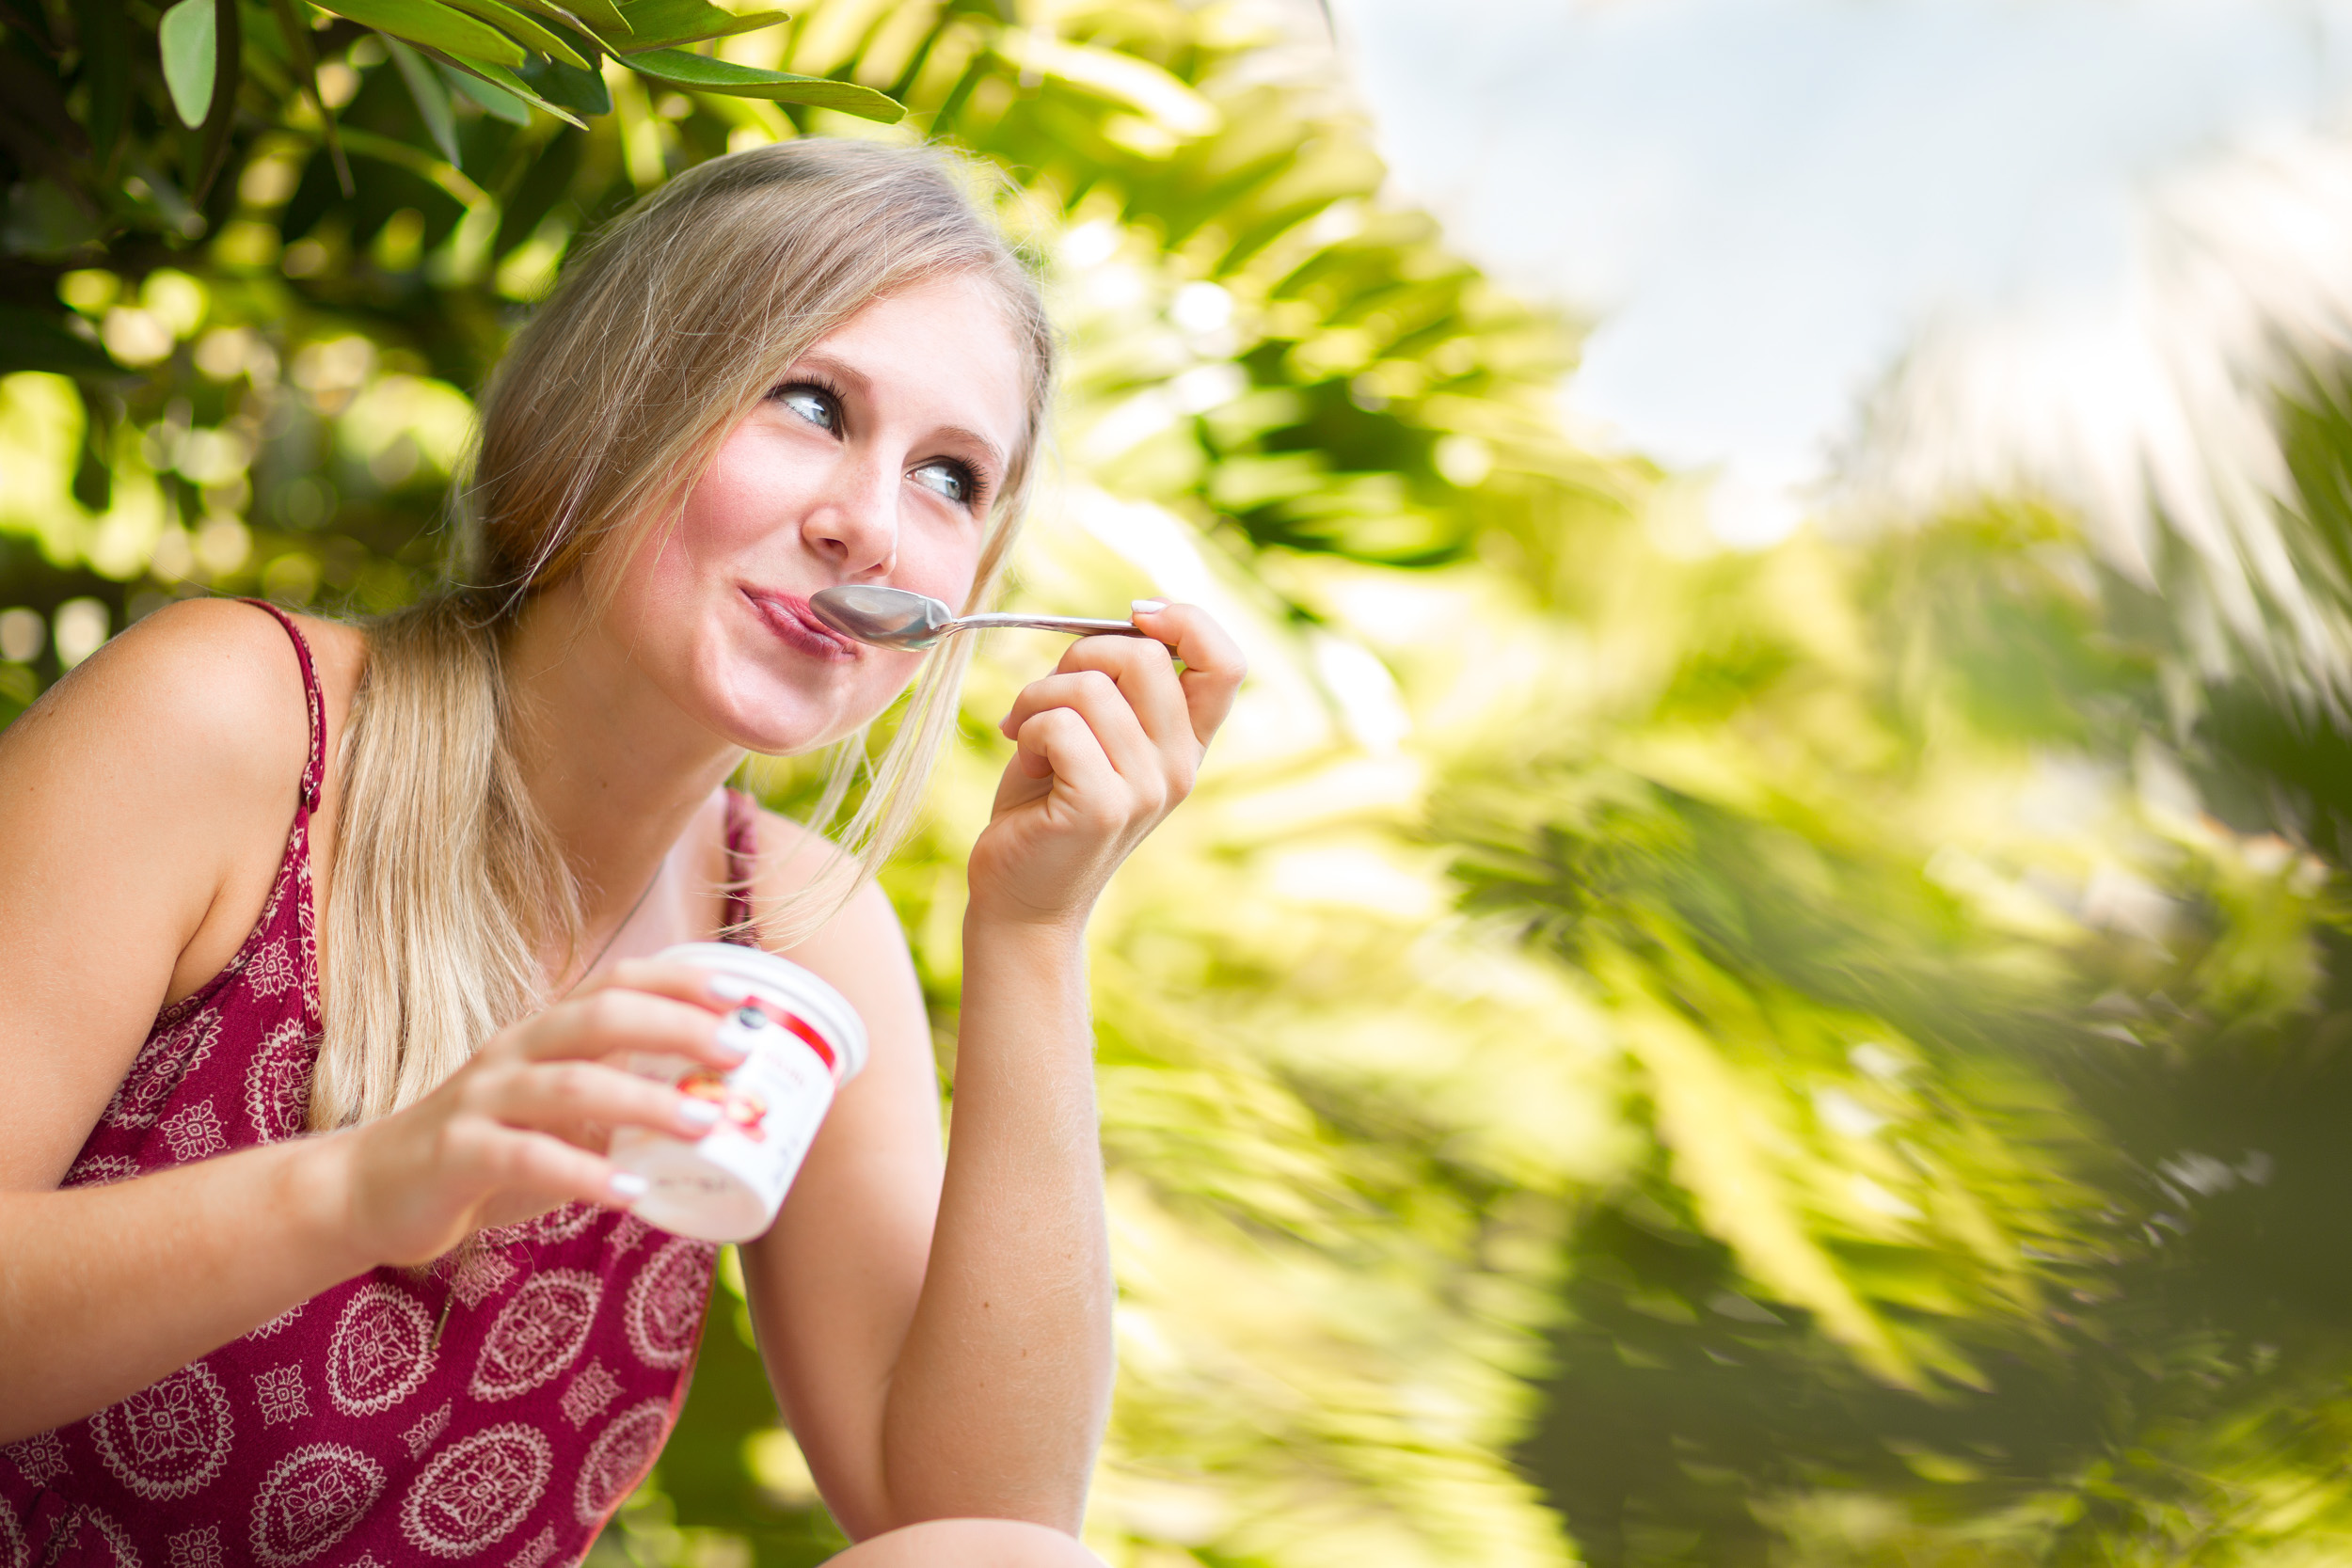 Young woman eating yogurt, photographed by commercial photographer Steve Widoff